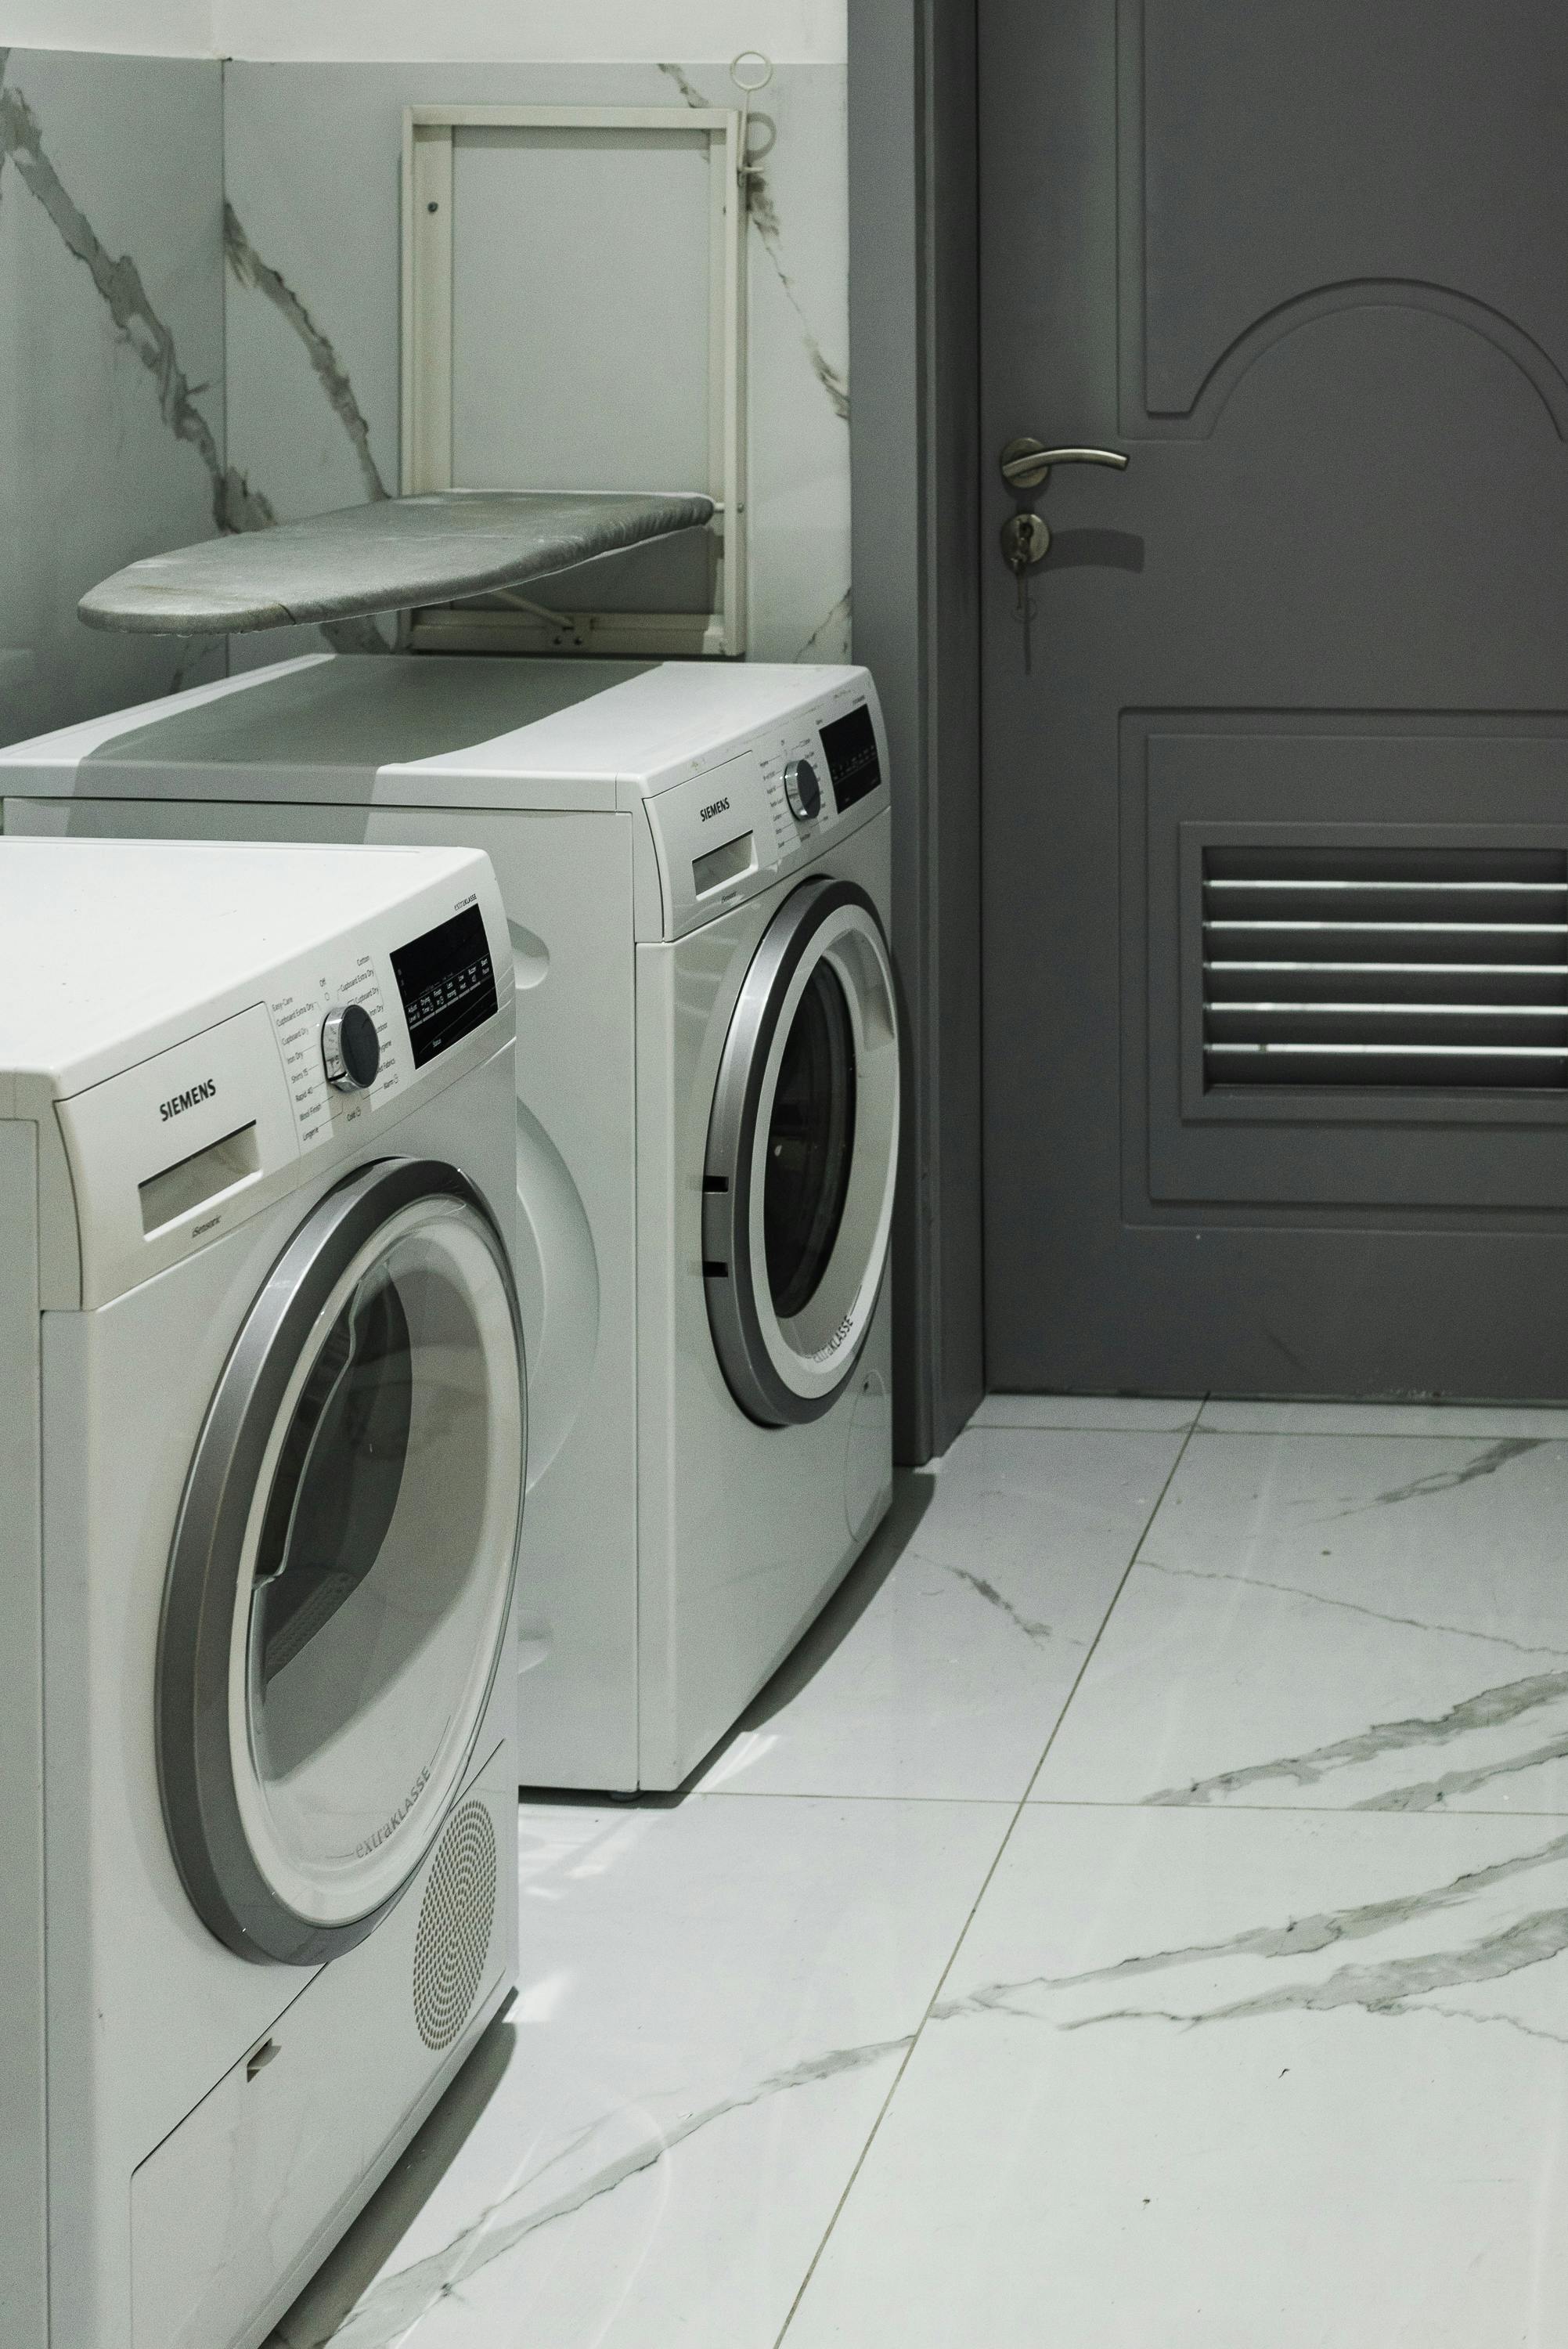 A washer and dryer | Source: Pexels